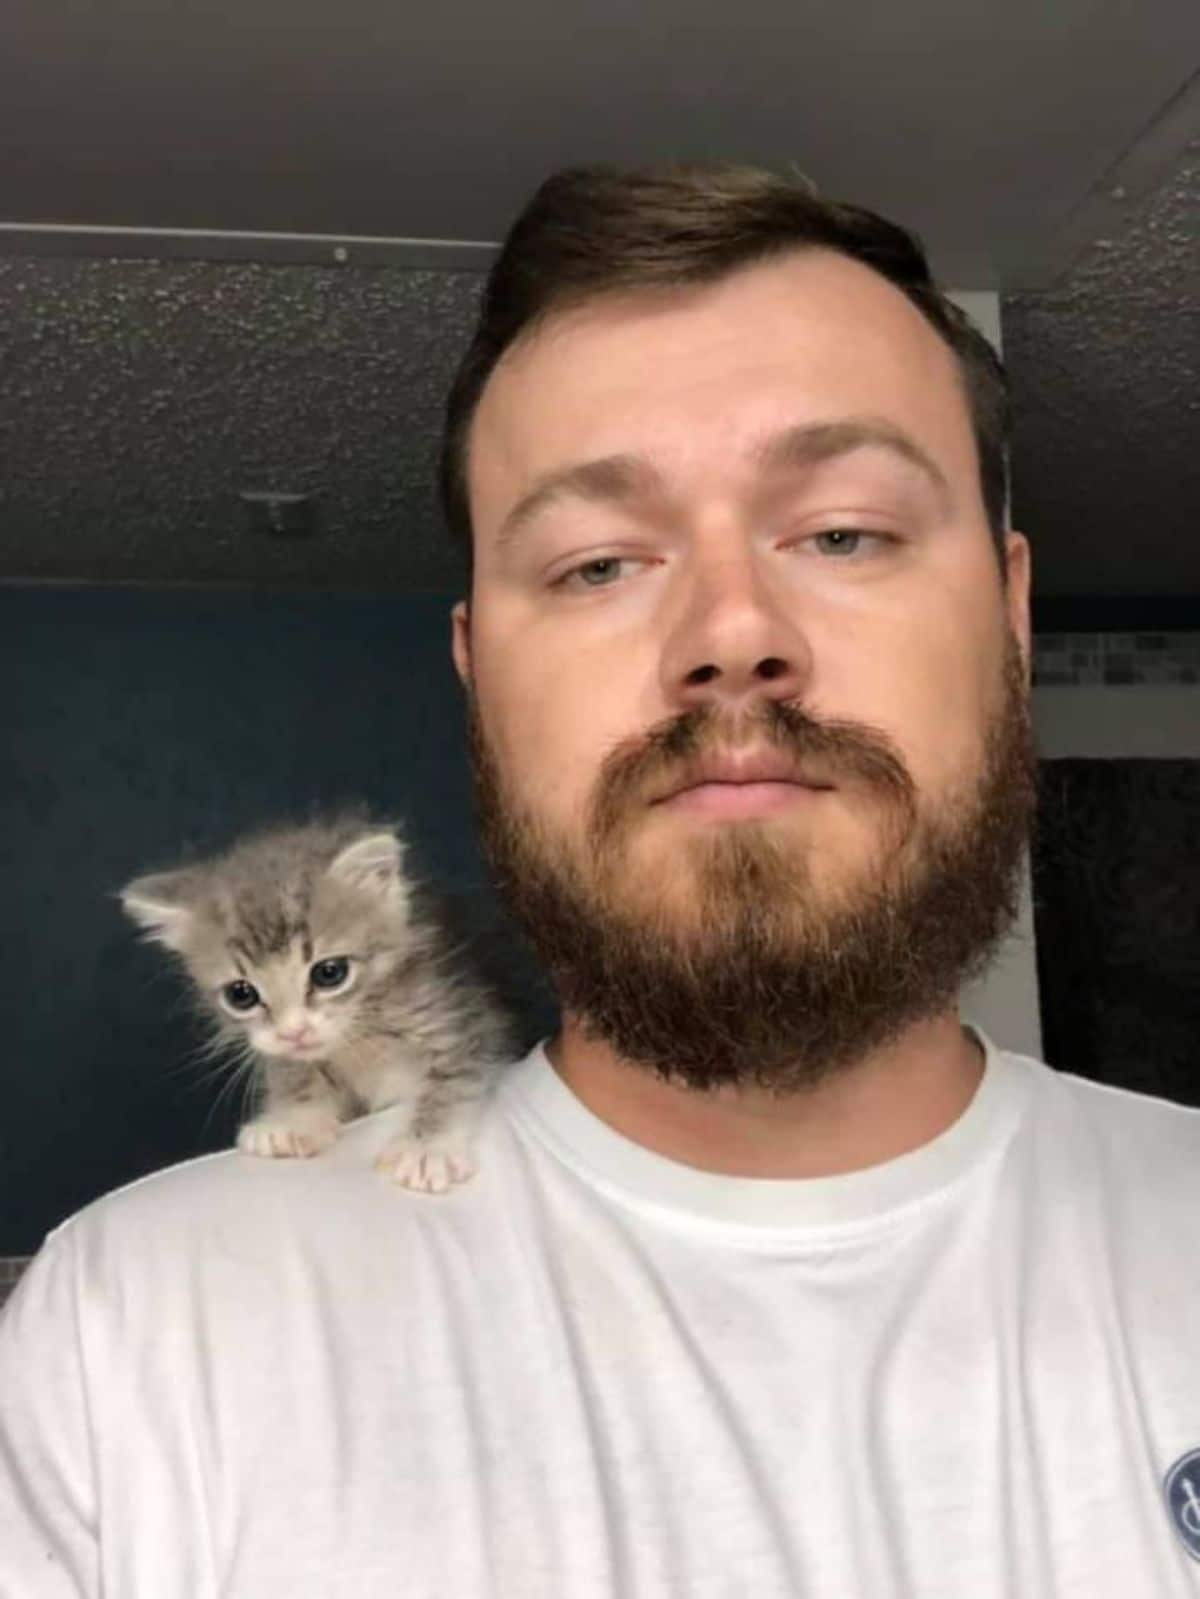 tiny grey and white tabby kitten on a man's shoulder